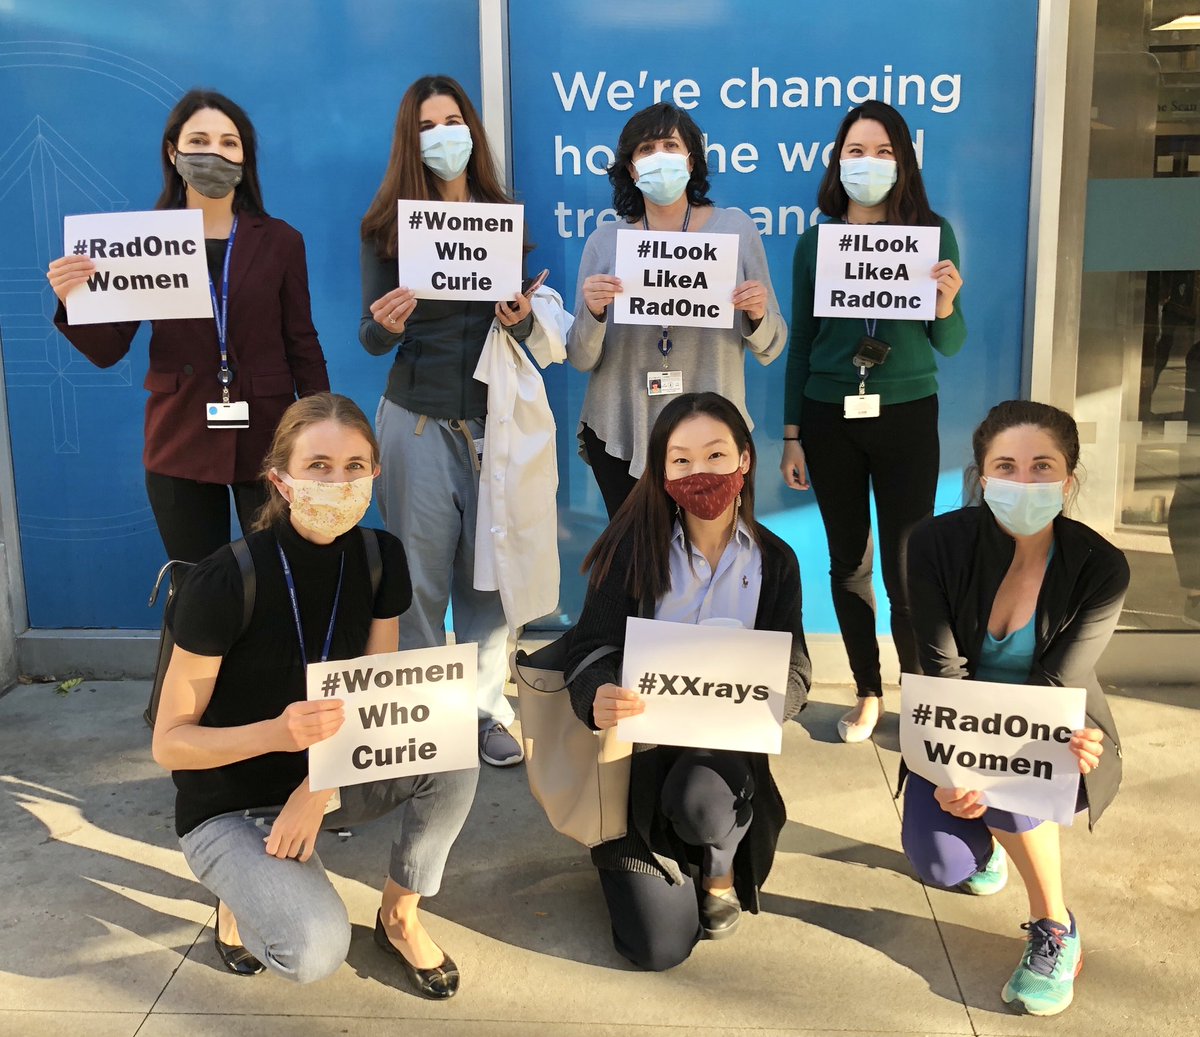 Our large #womenWhoCurie photos are stymied by a pandemic, but @sloan_kettering continues to educate, hire, and support a diverse group of #RadOncWomen like Drs Reyngold, Zinovoy, Tringale, @JMaRadOnc, @ErinGillespieMD, Future doc @helenyuezha & RTT QA head Gerri Pastrana.